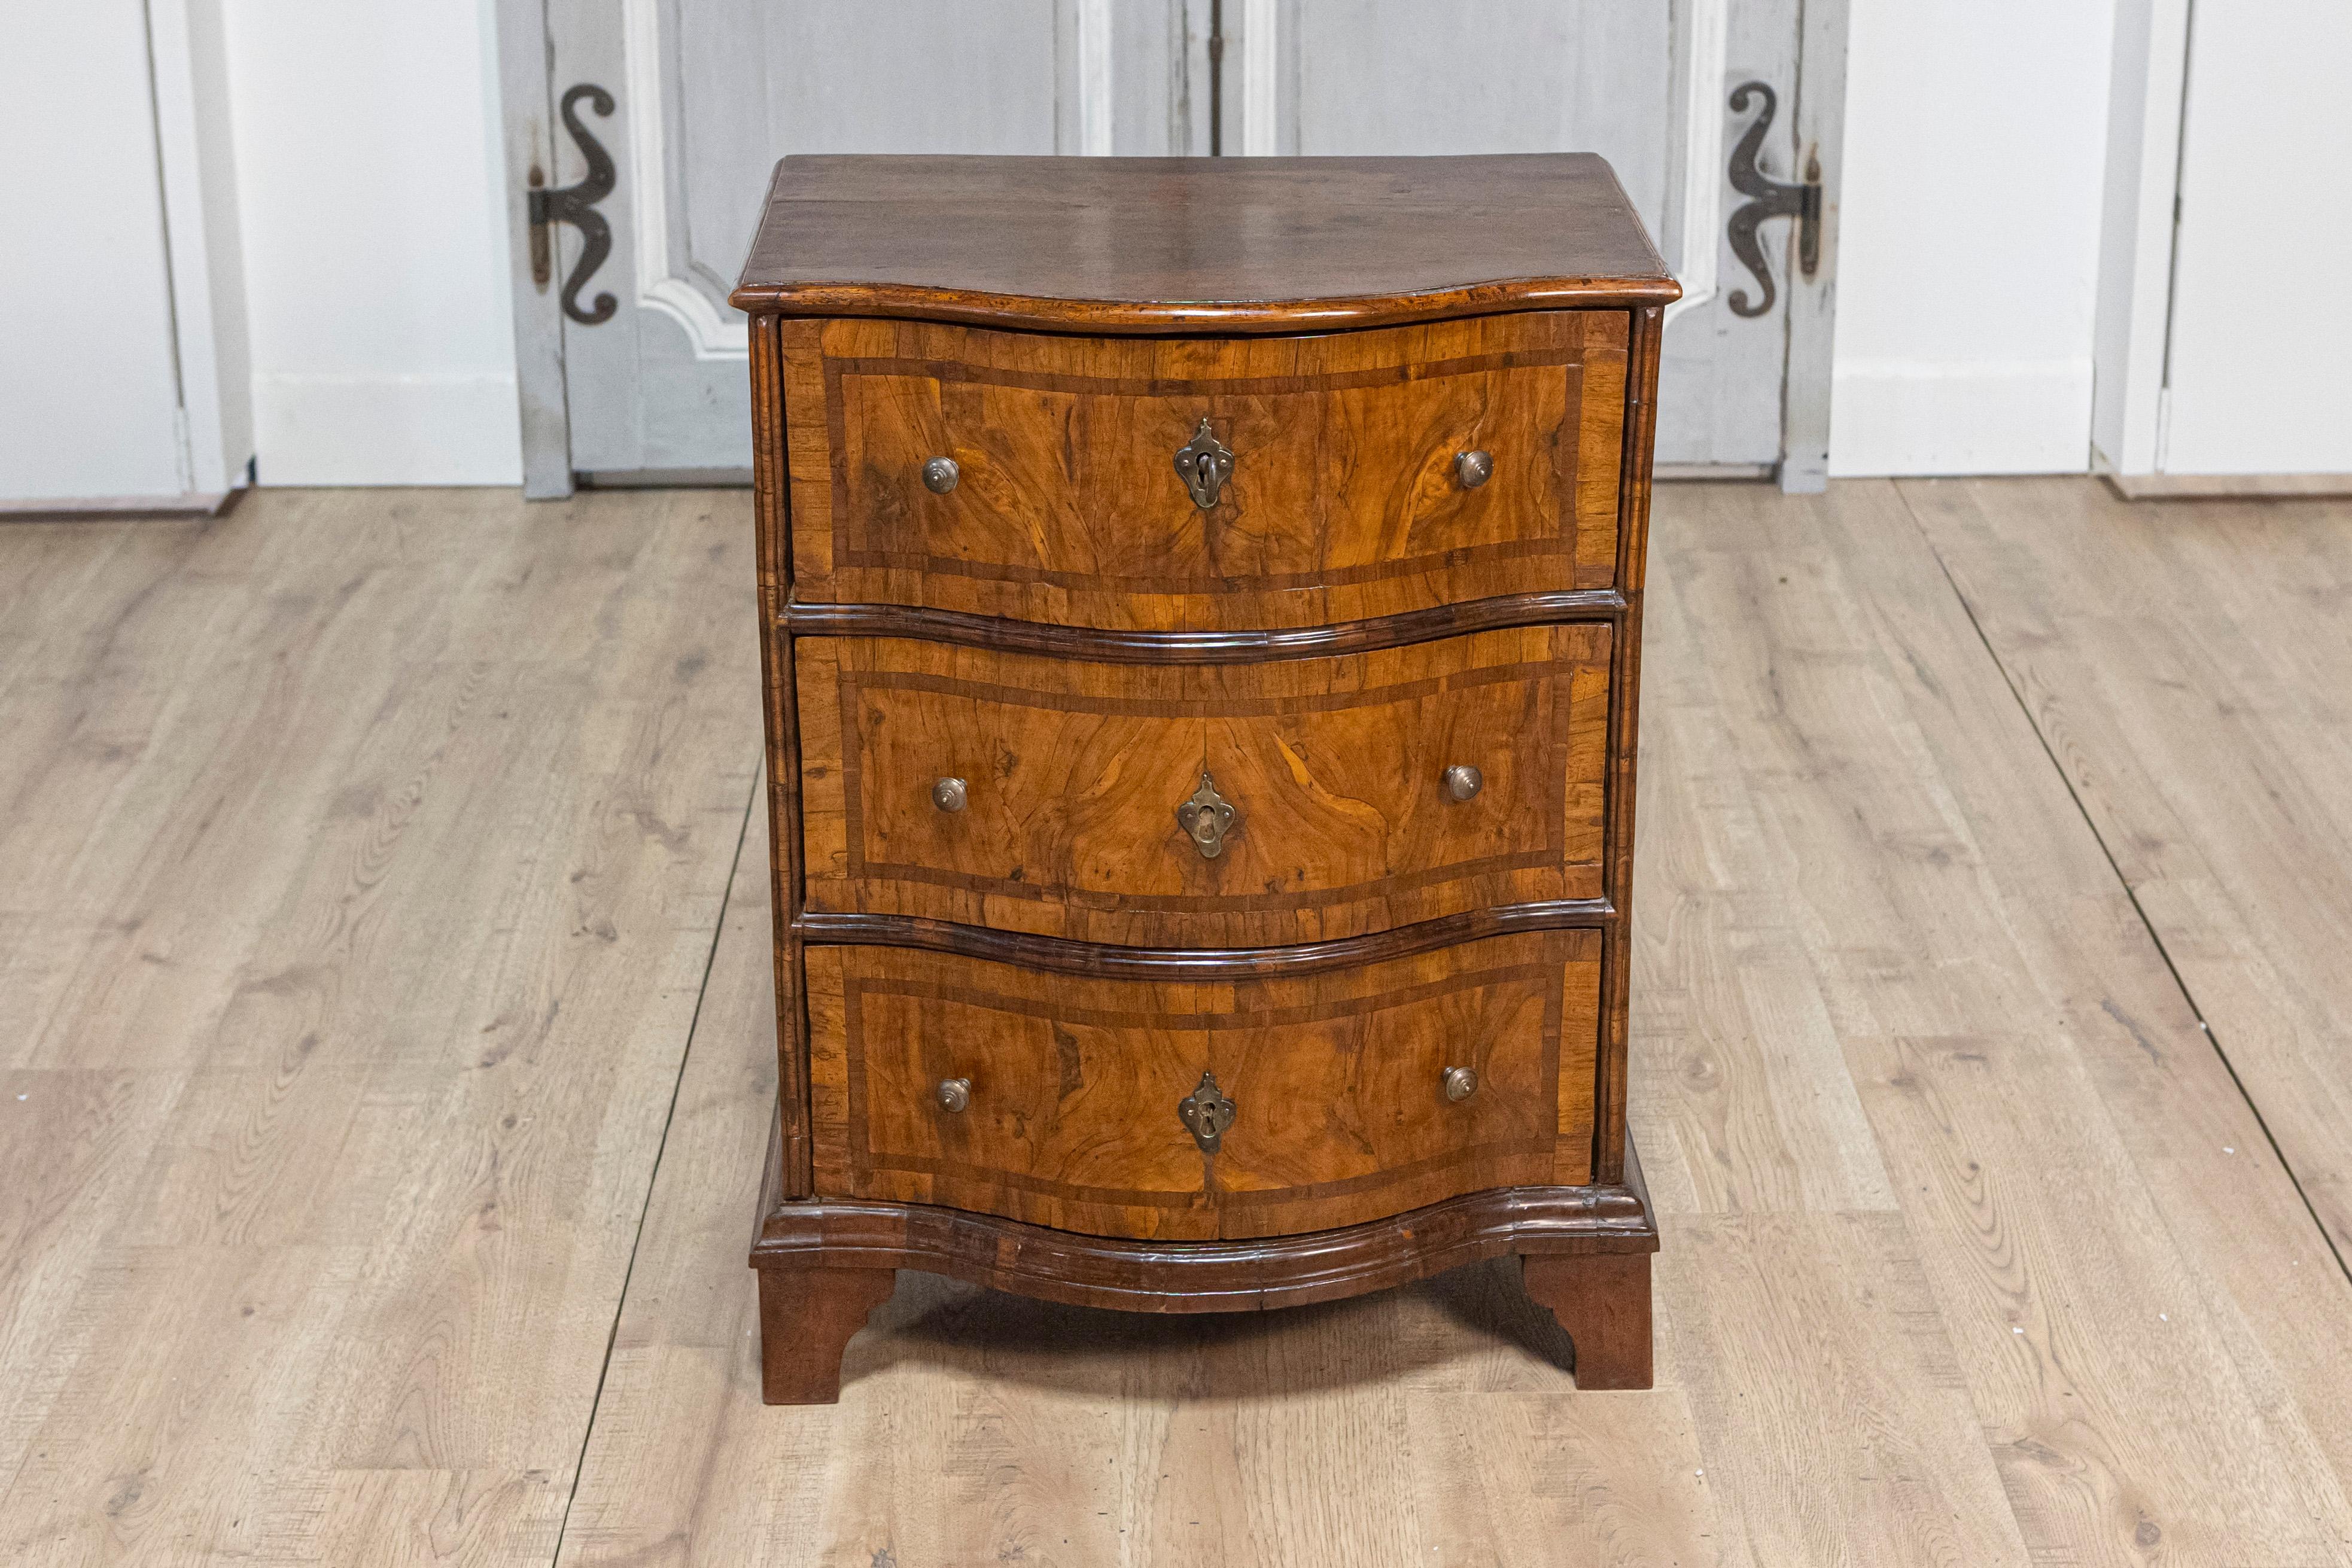 An Italian walnut and mahogany three-drawer chest from the 18th century with serpentine front, aged bronze hardware and bracket feet. Immerse yourself in the allure of the 18th century with this Italian walnut and mahogany three-drawer chest. The